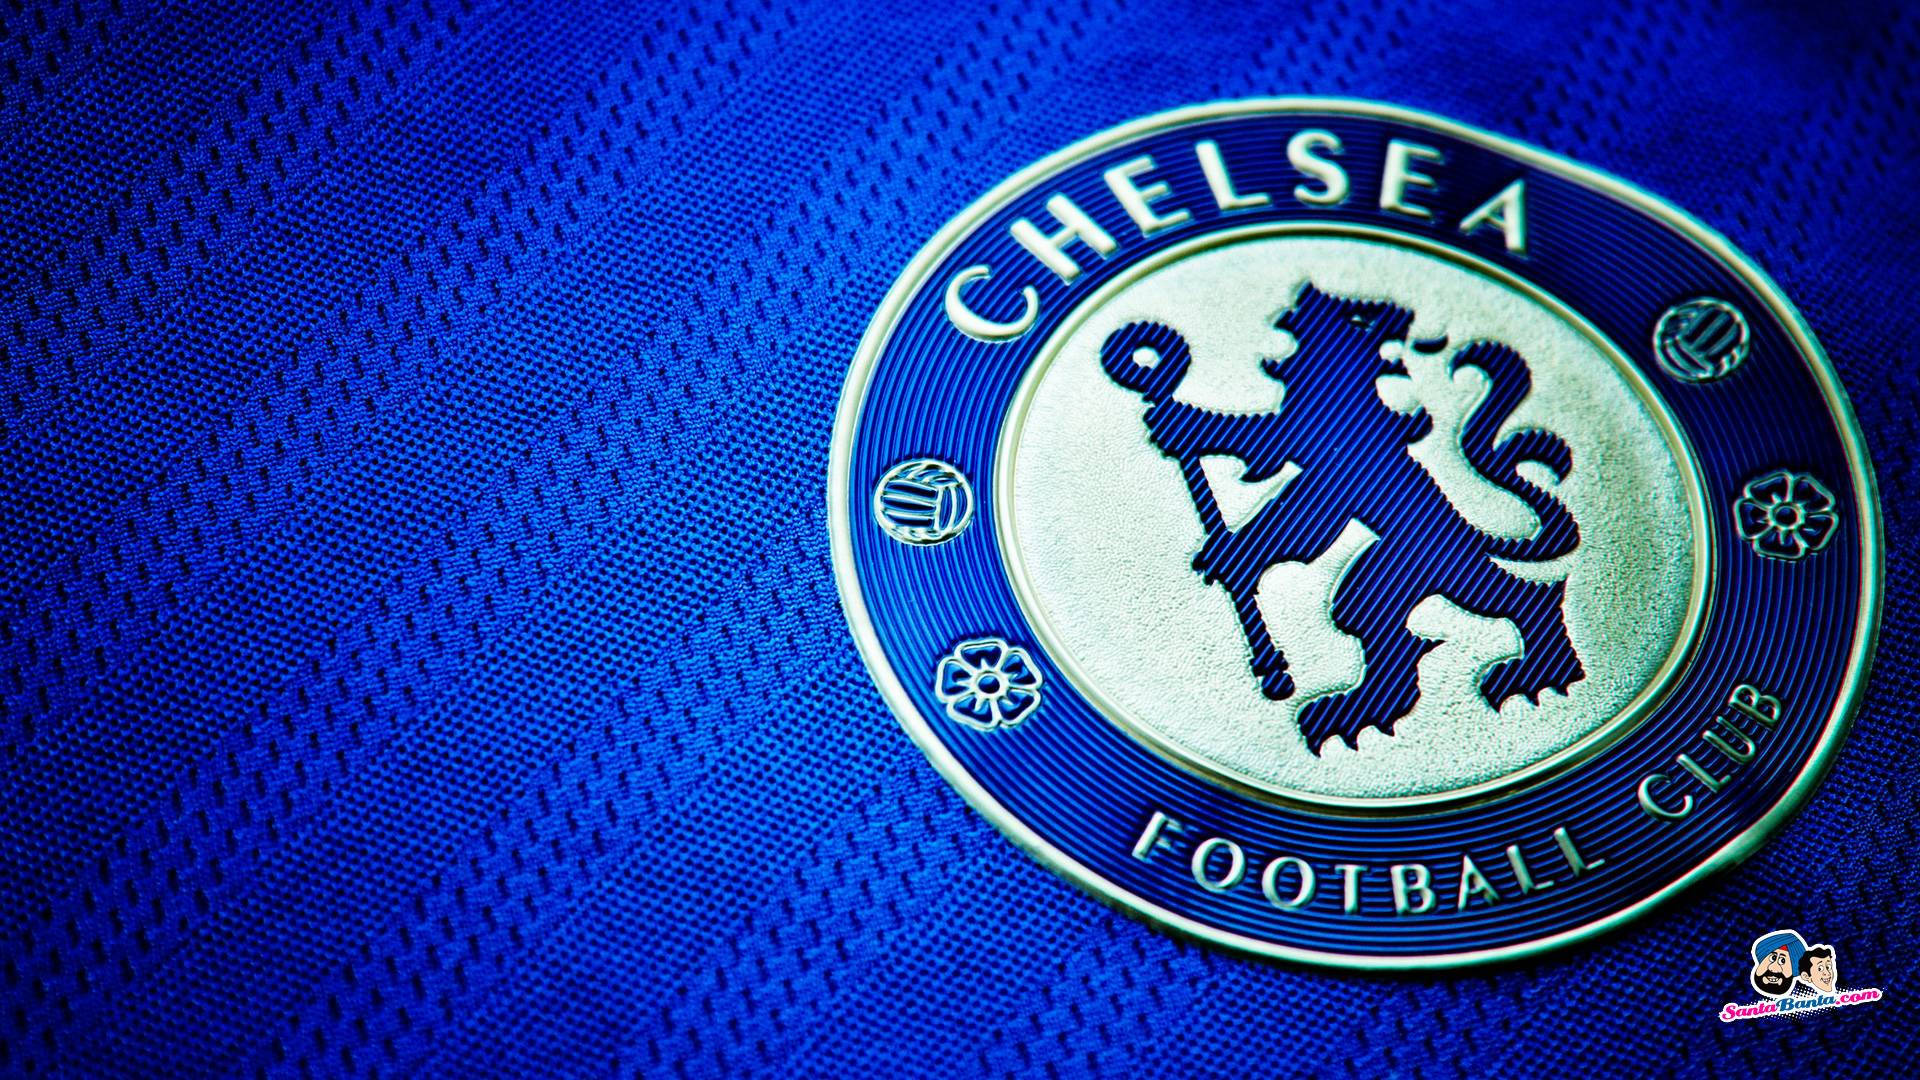 Chelsea Fc Jersey Close-up Background